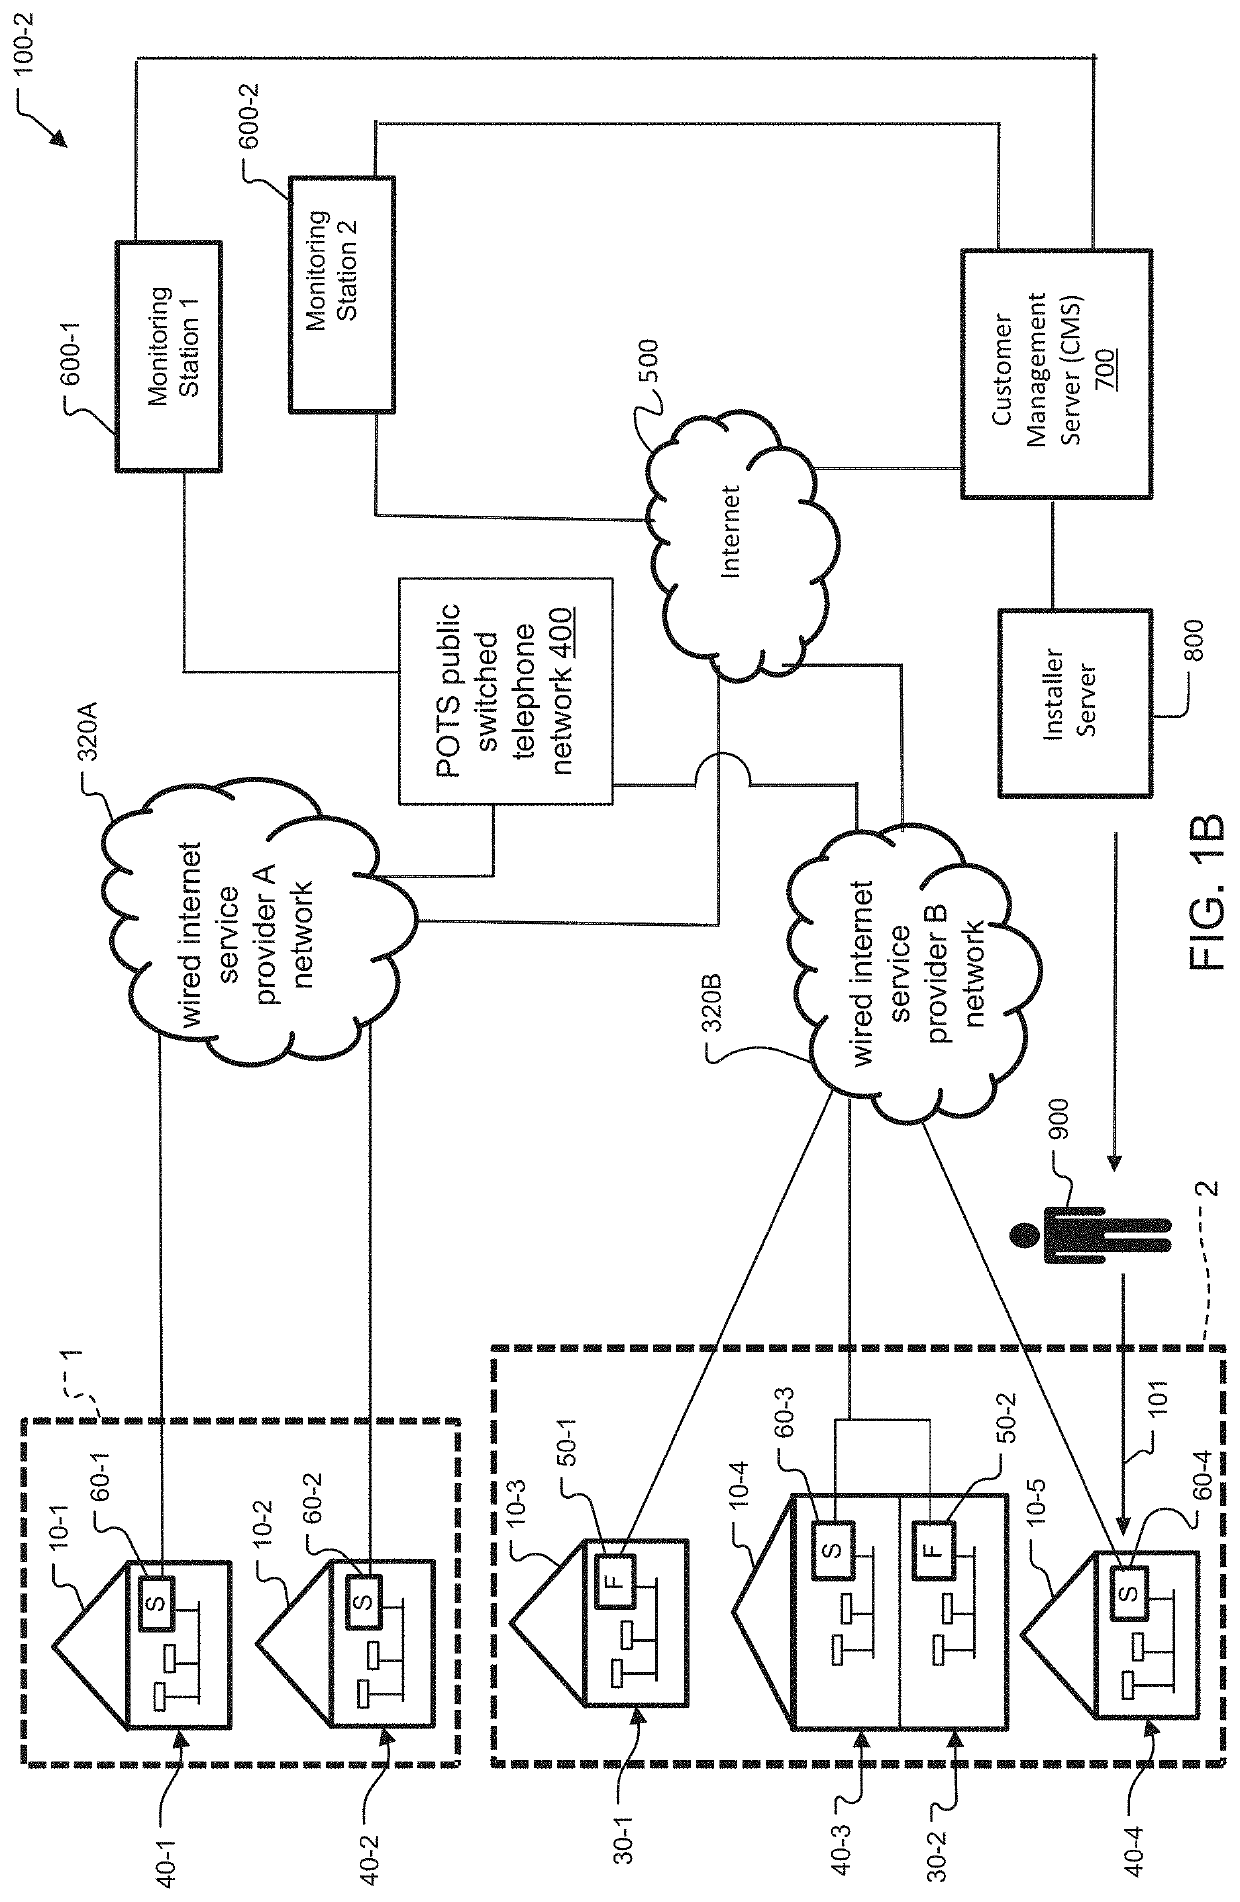 Network data aggregation system and method for building management systems